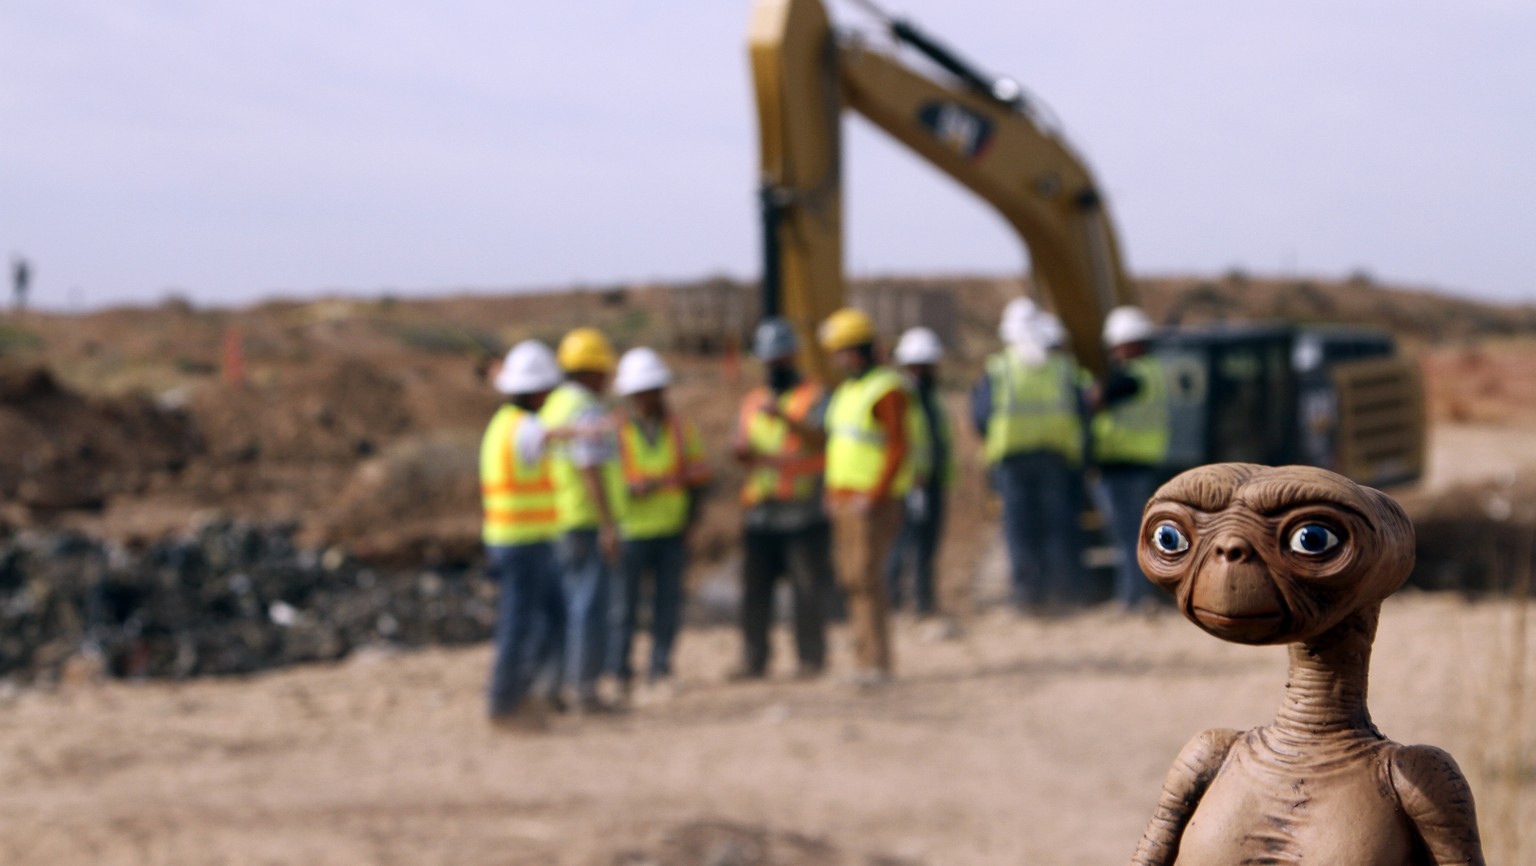 An E.T. doll is seen while construction workers prepare to dig into a landfill in Alamogordo, N.M., Saturday, April 26, 2014. Producers of a documentary are digging in the landfill in search of millio ...